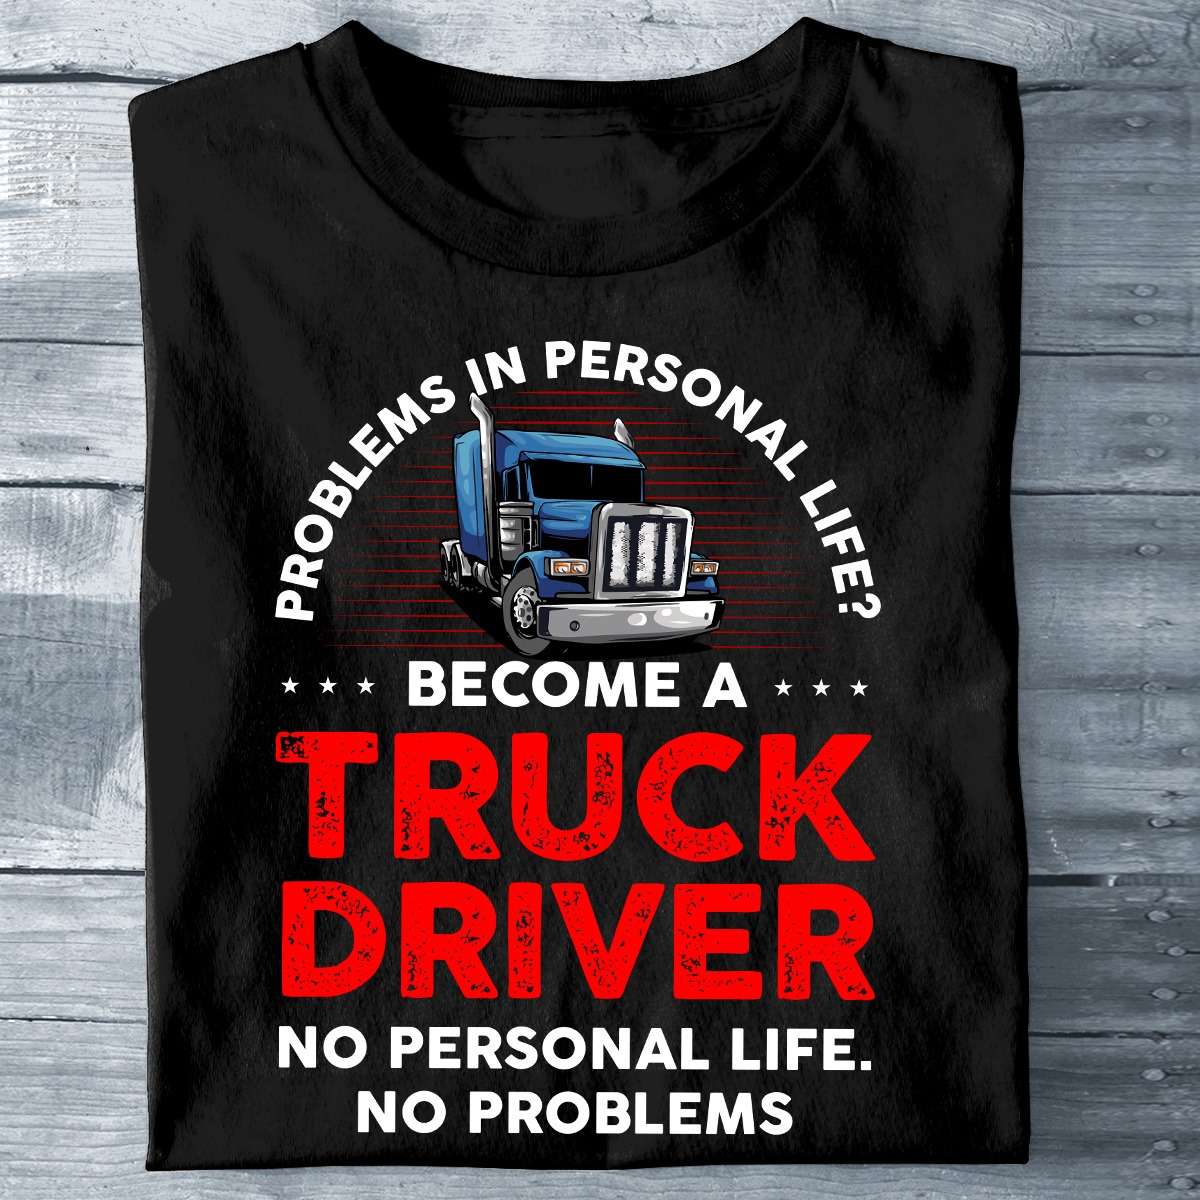 Problems in personal life Become a truck driver - No personal life, no problems